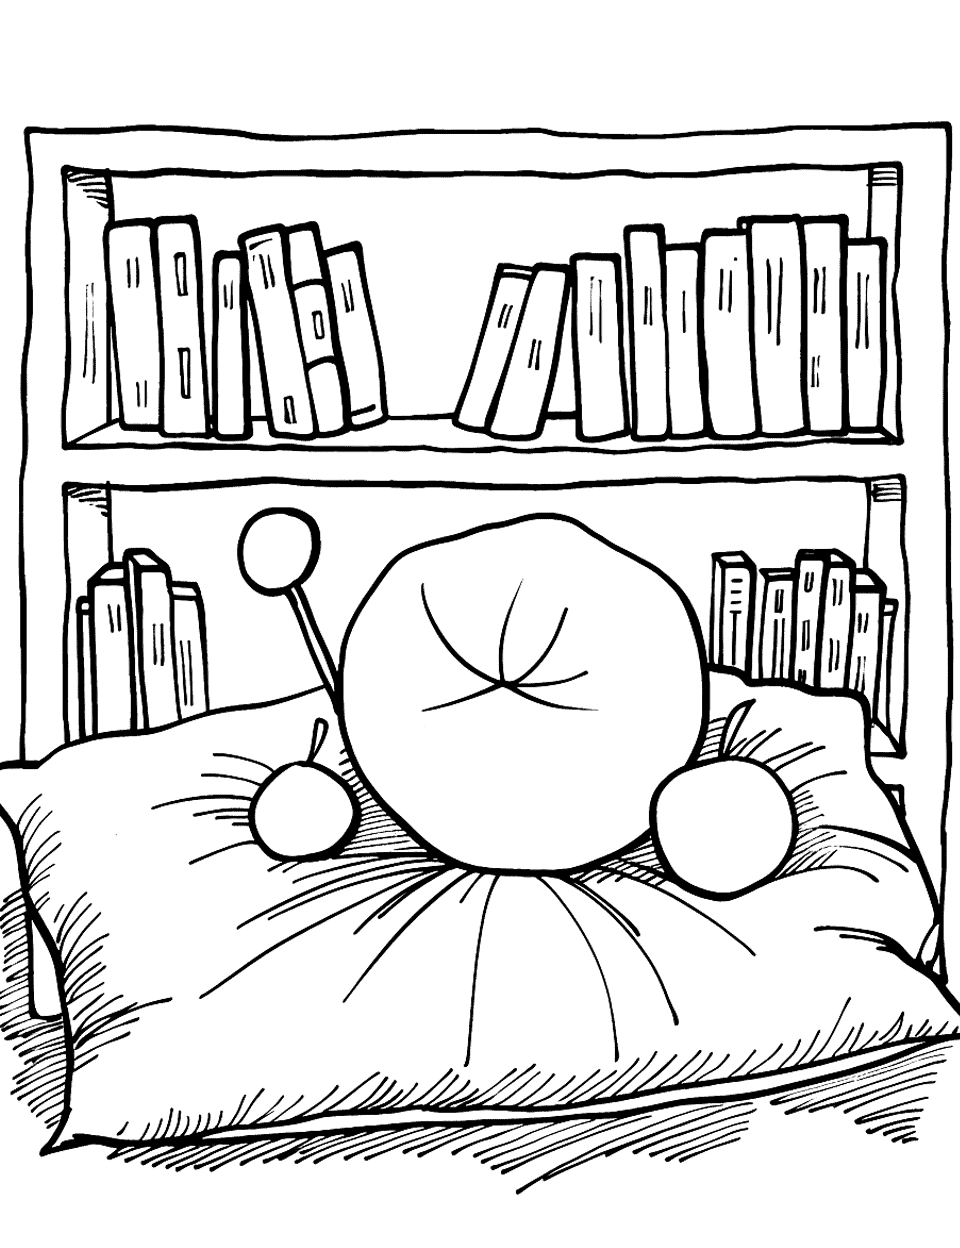 Rectangle Reading Nook Shapes Coloring Page - A cozy corner with a rectangular bookshelf filled with books.